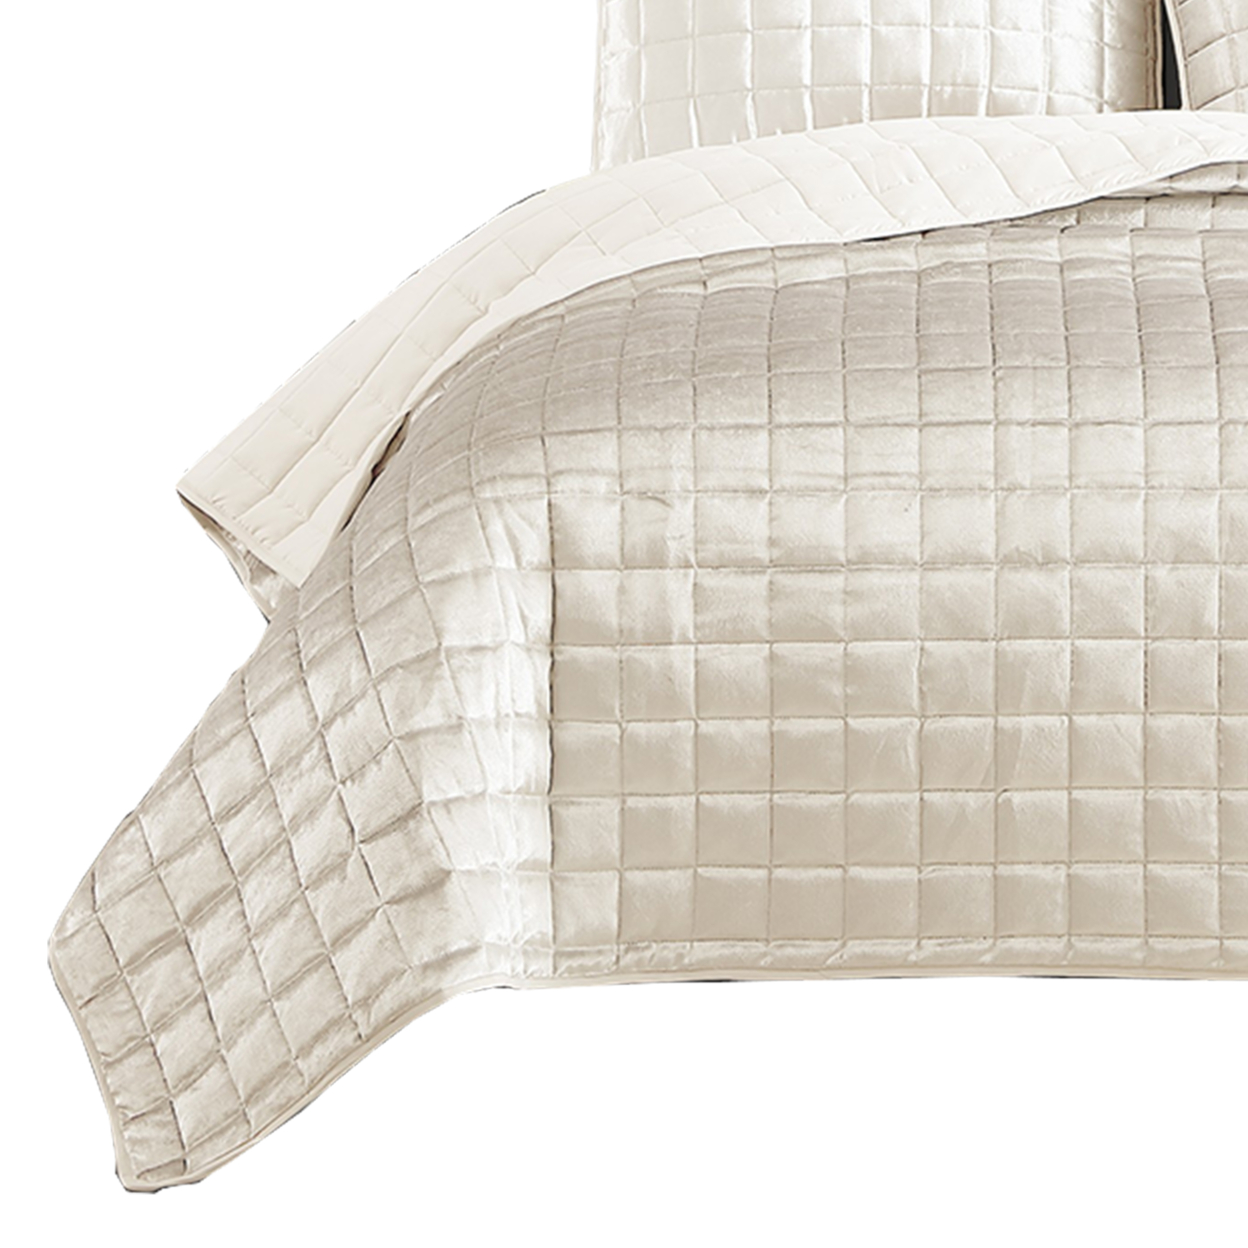 3 Piece King Size Coverlet Set With Stitched Square Pattern, Cream- Saltoro Sherpi